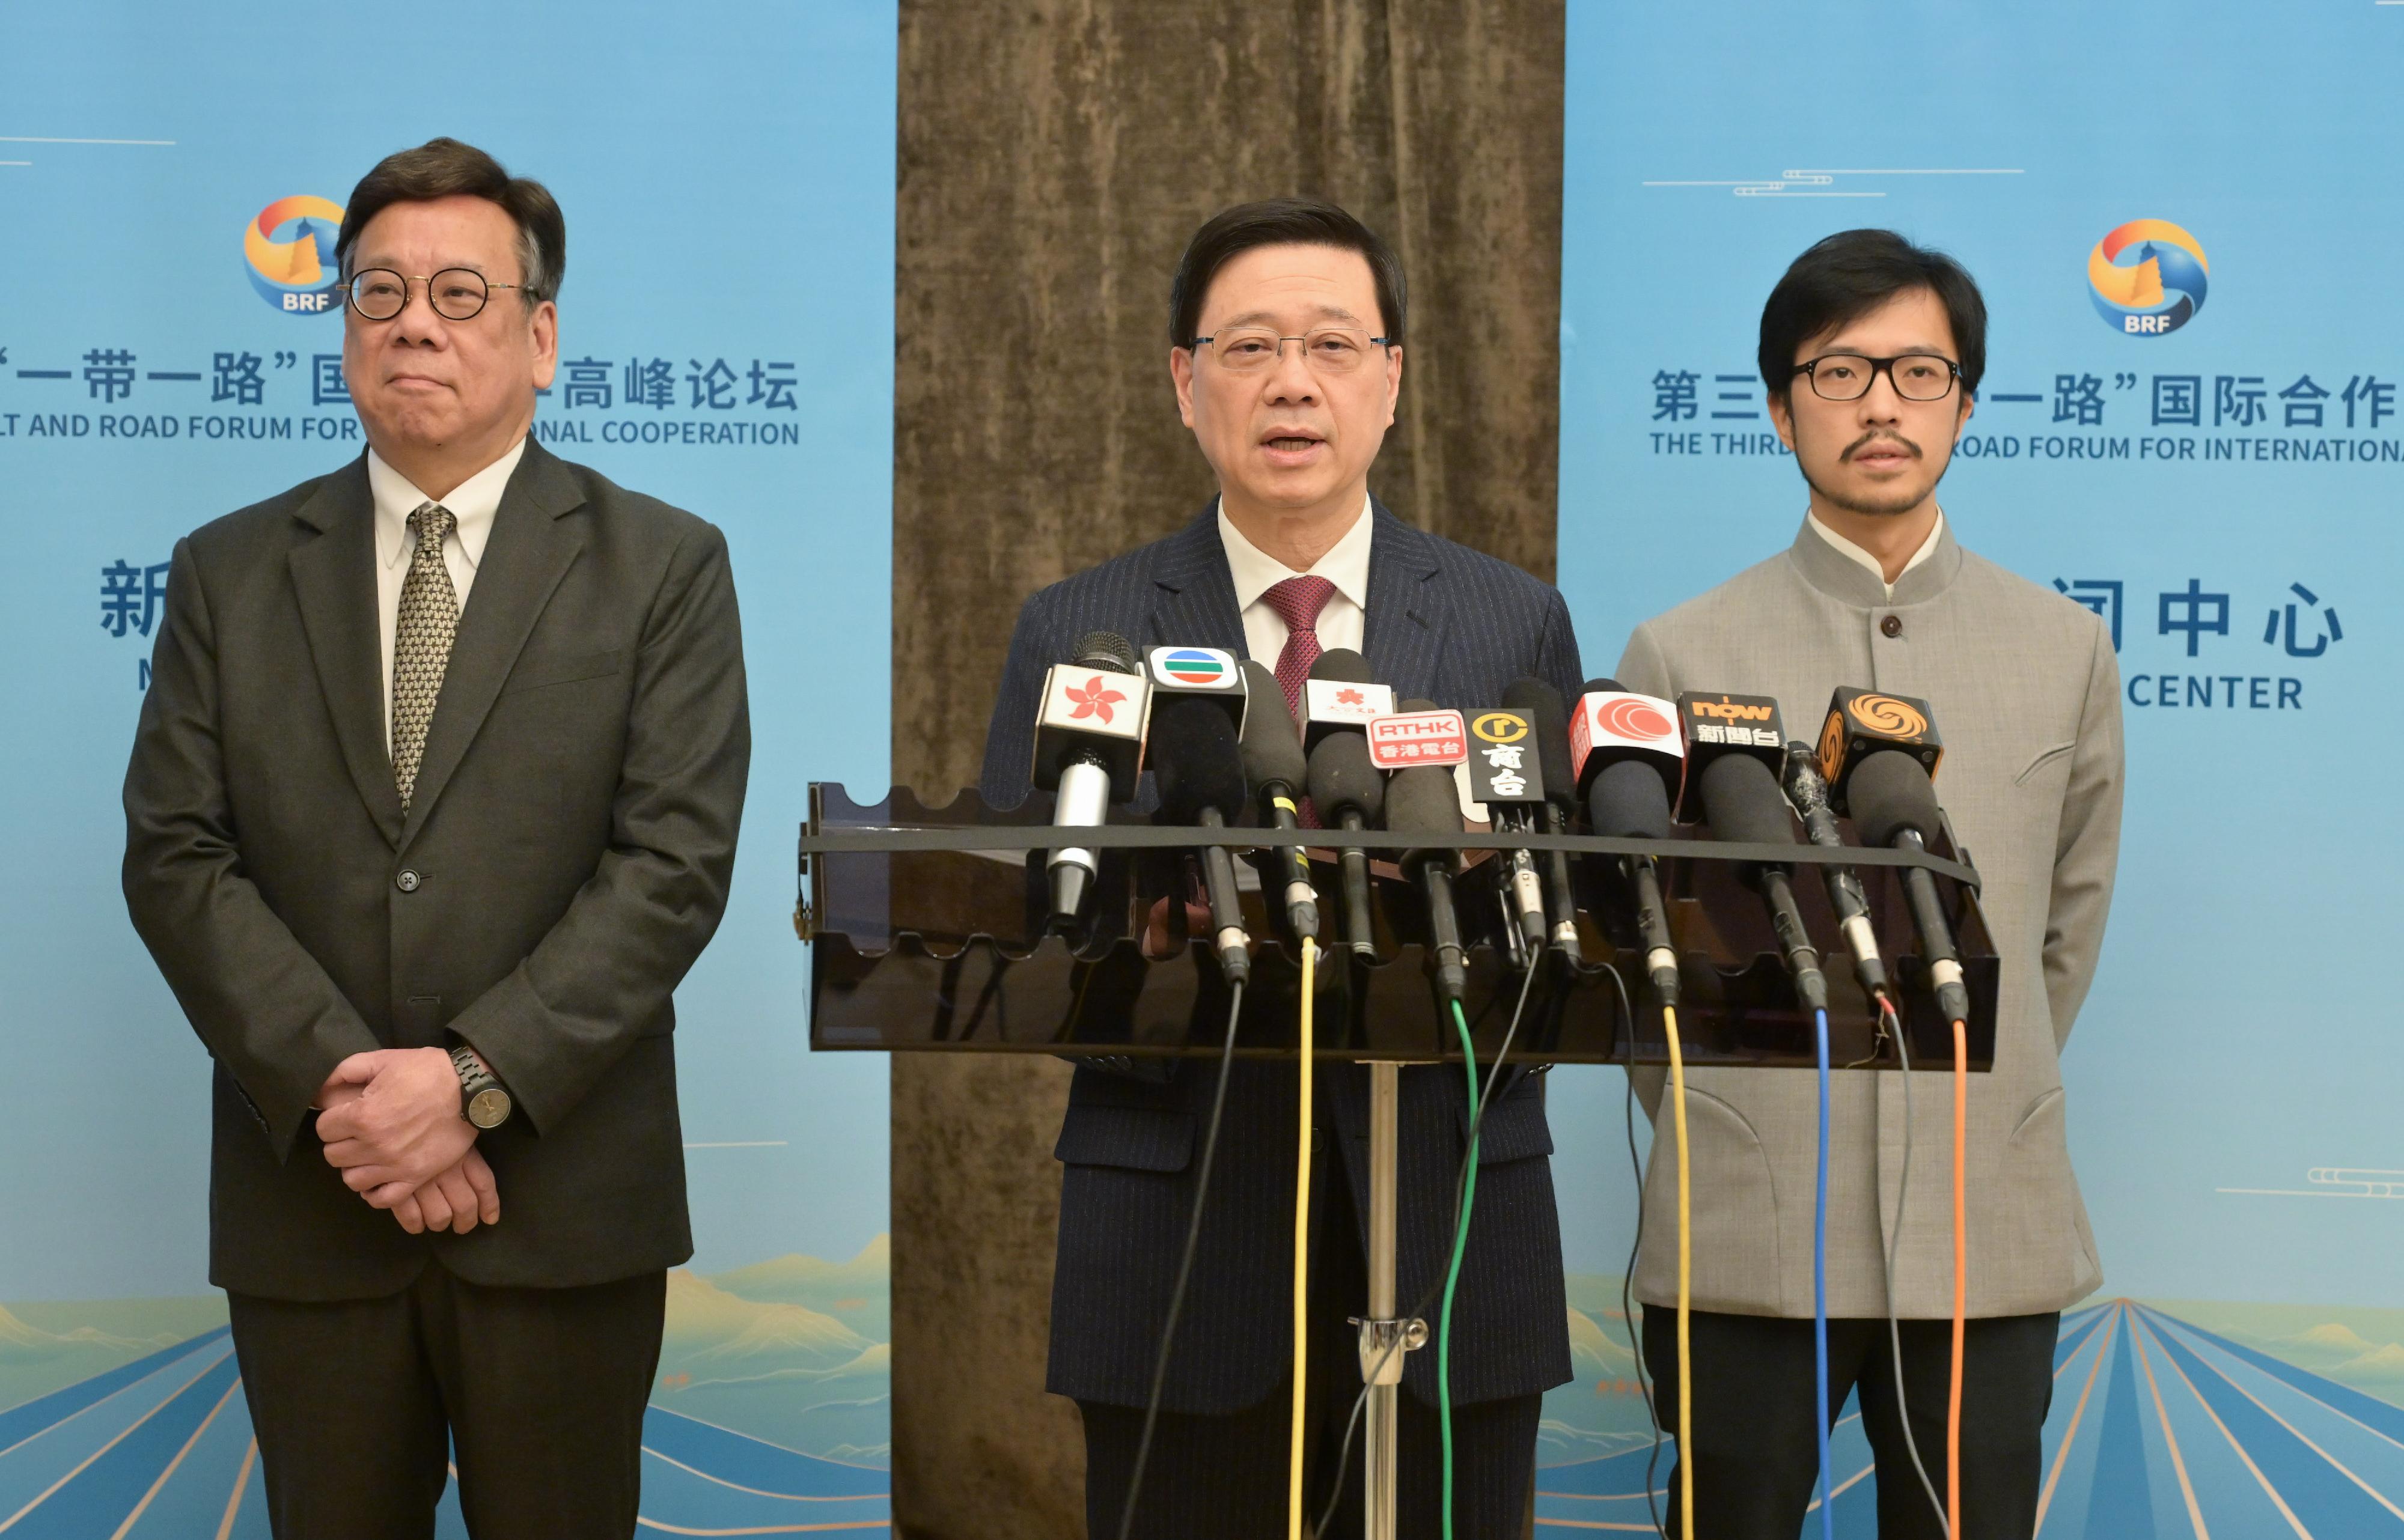 The Chief Executive, Mr John Lee, led a high-level Hong Kong Special Administrative Region delegation comprising senior government officials and members of various sectors to participate in the third Belt and Road Forum for International Cooperation. Photo shows Mr Lee (centre), together with the Secretary for Commerce and Economic Development, Mr Algernon Yau (left), and the Commissioner for Belt and Road, Mr Nicholas Ho (right), meeting the media in Beijing today (October 19).

